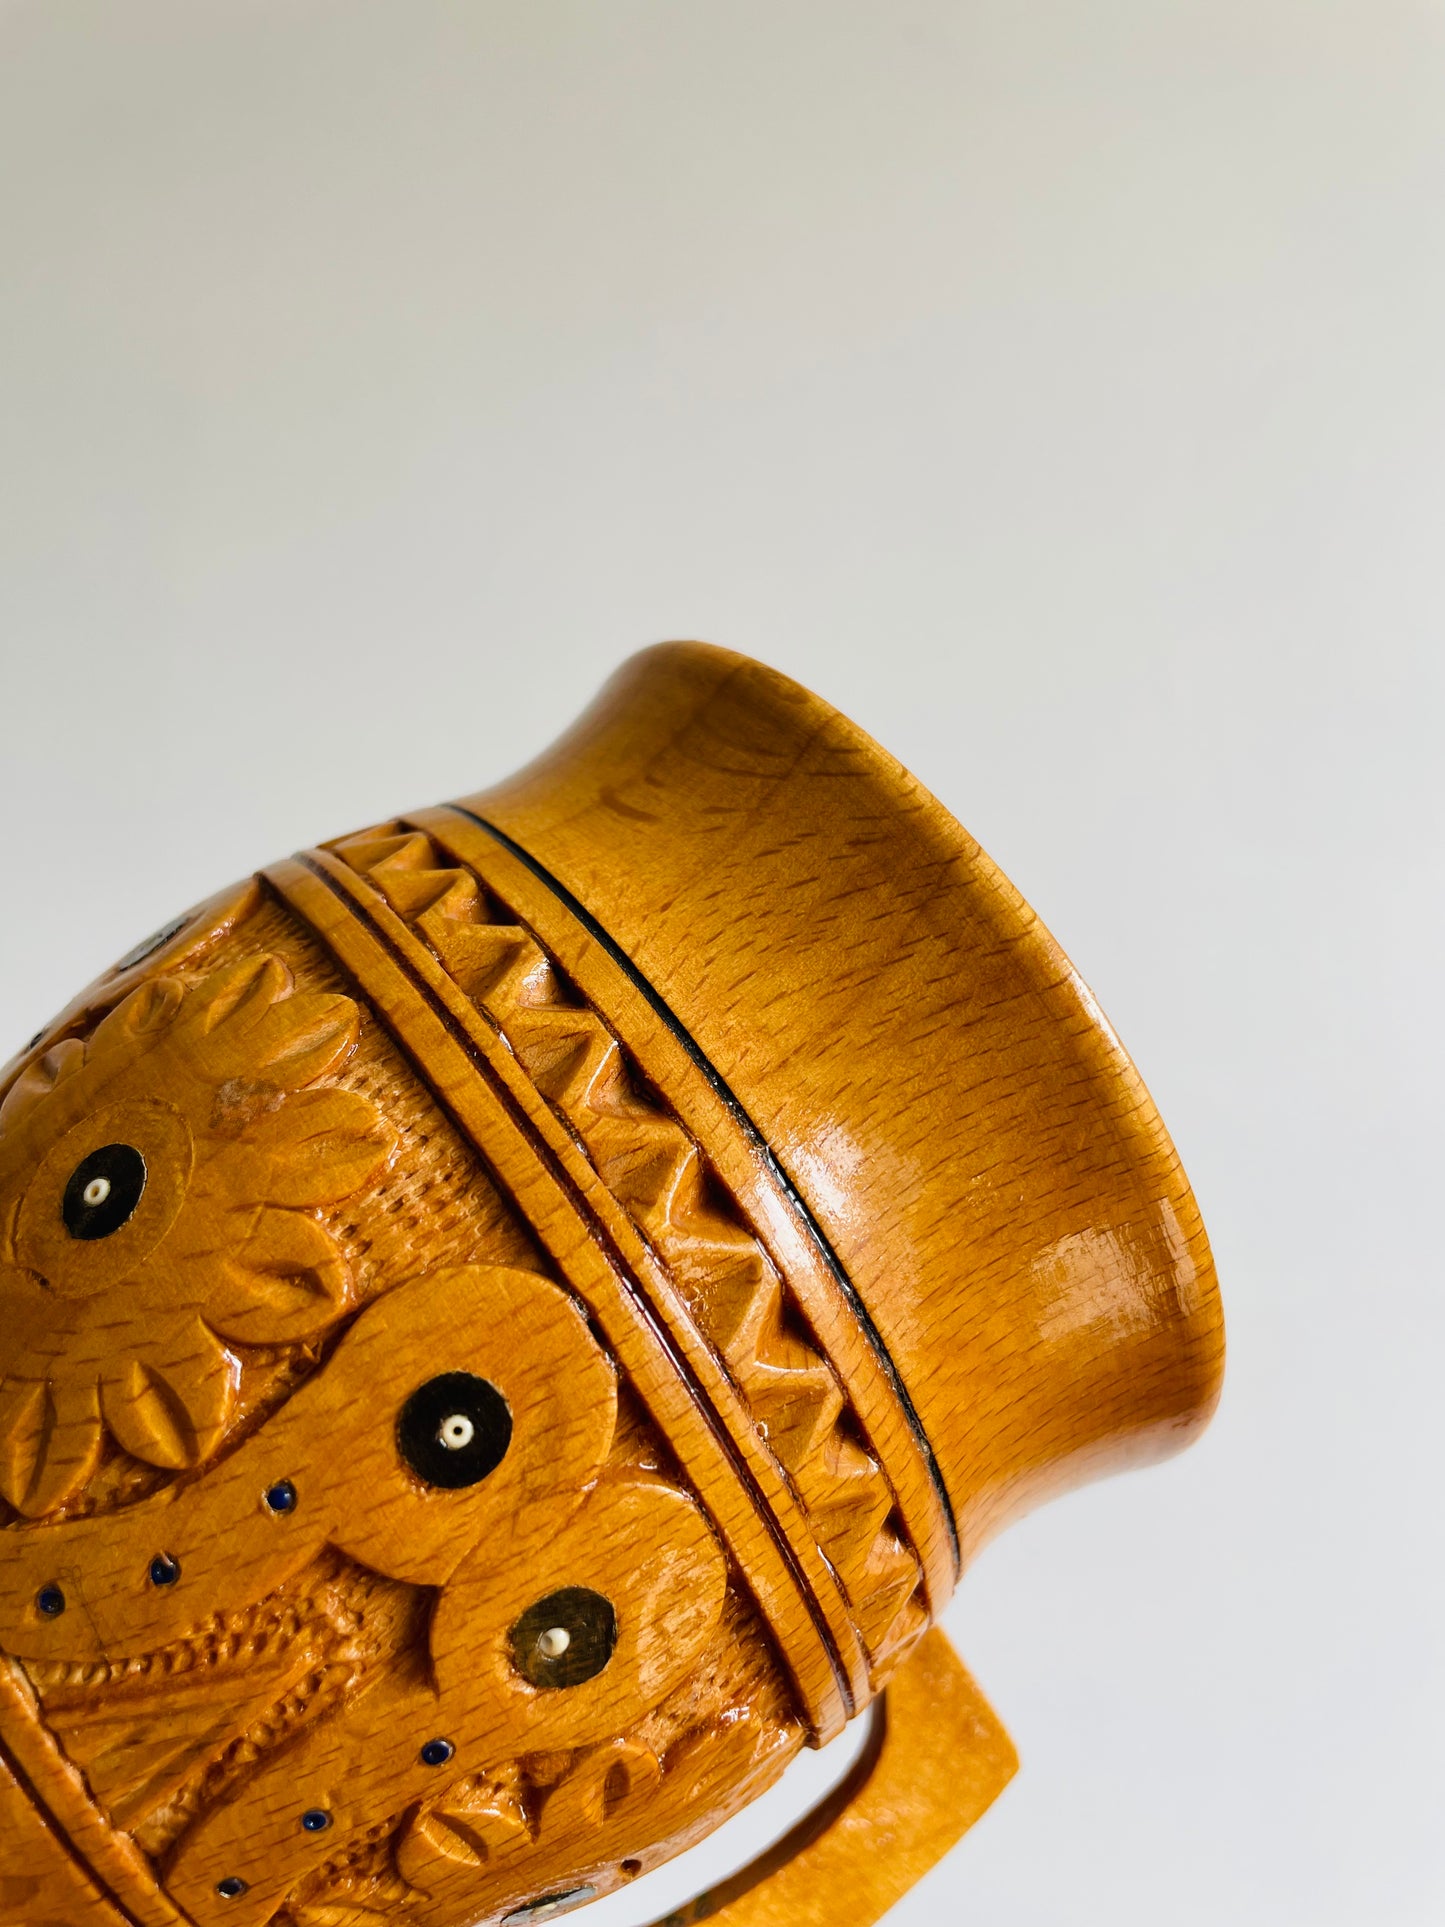 Rustic Traditional Ukrainian Folk Carved Wooden Mug Cup with Hand Painted Floral Design